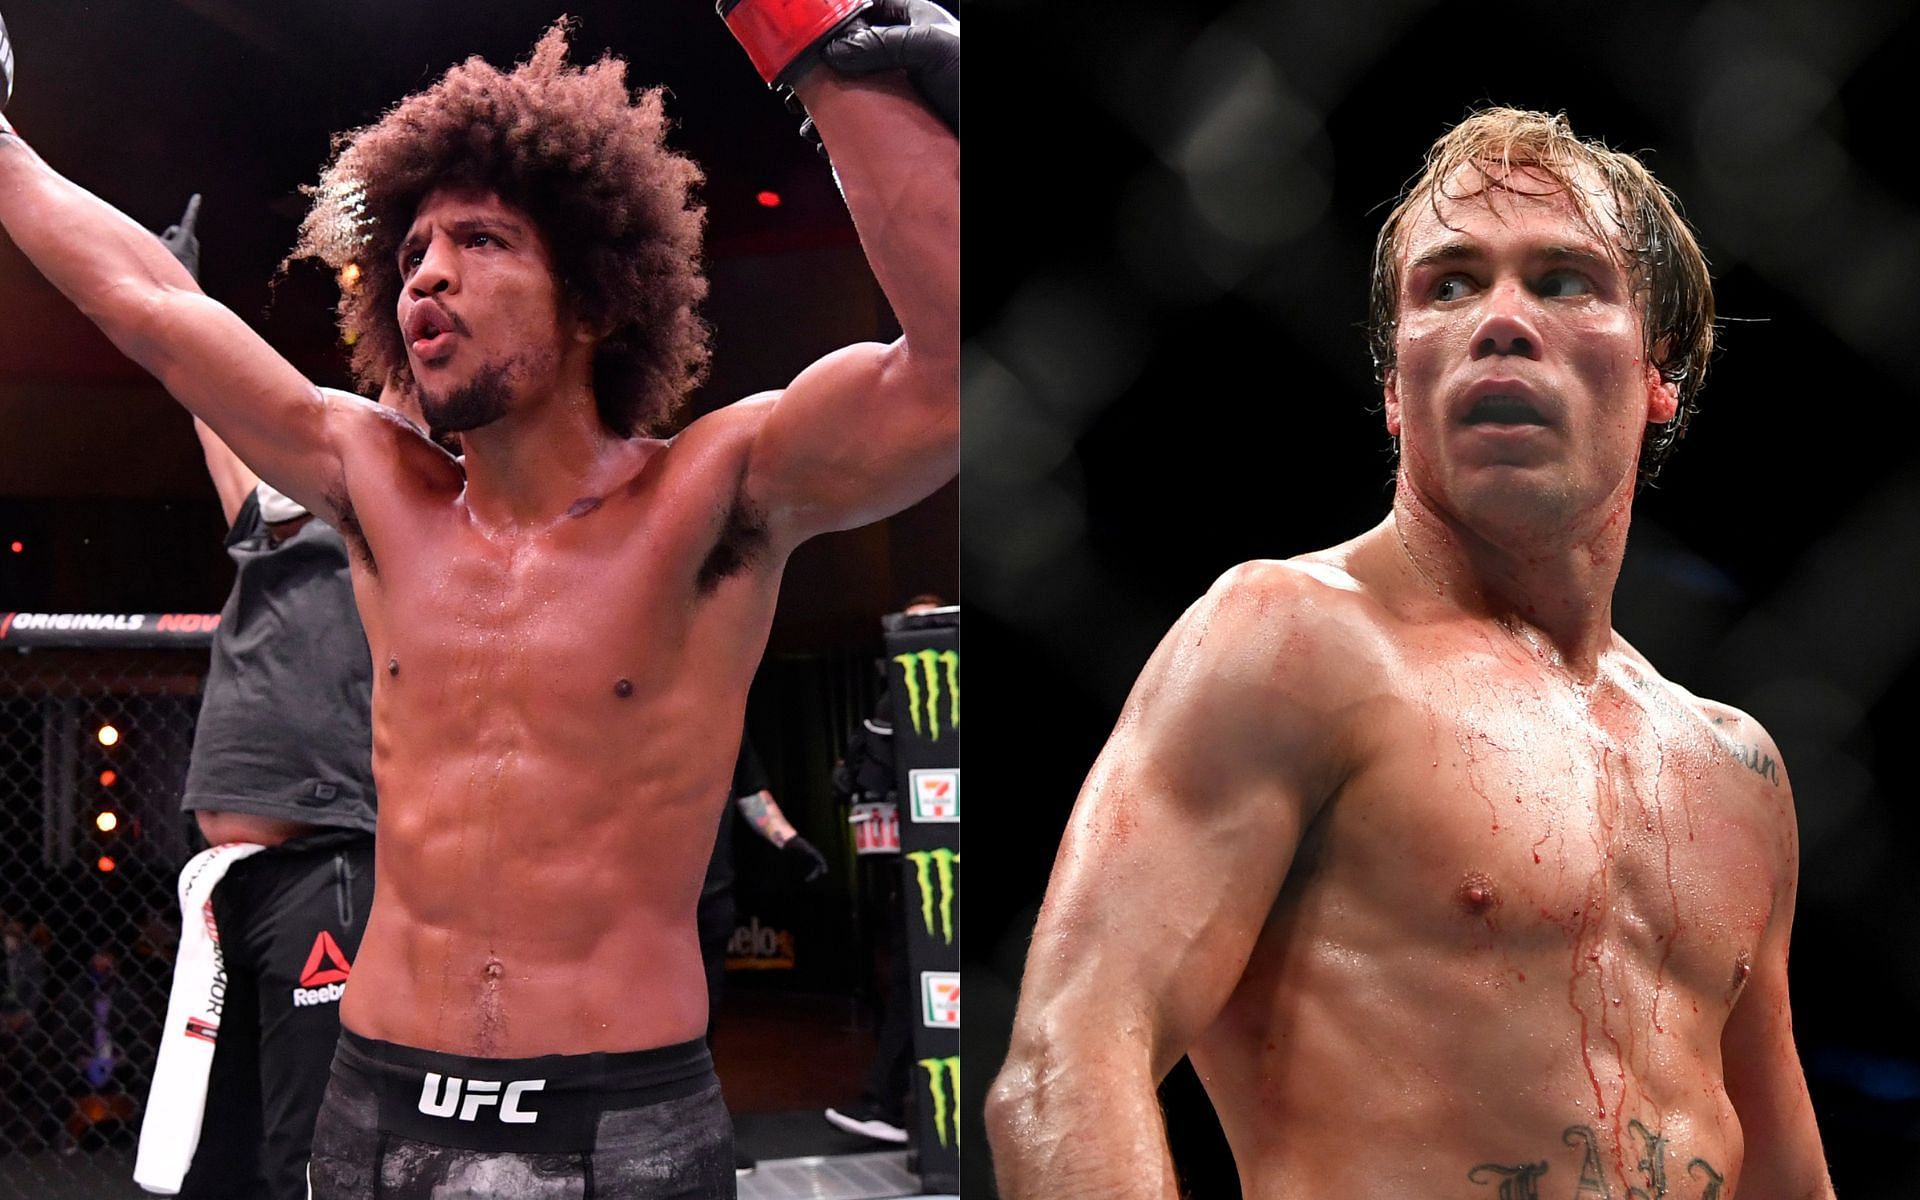 Alex Caceres (left) and Nate Landwehr (right) (Image credits Getty Images)